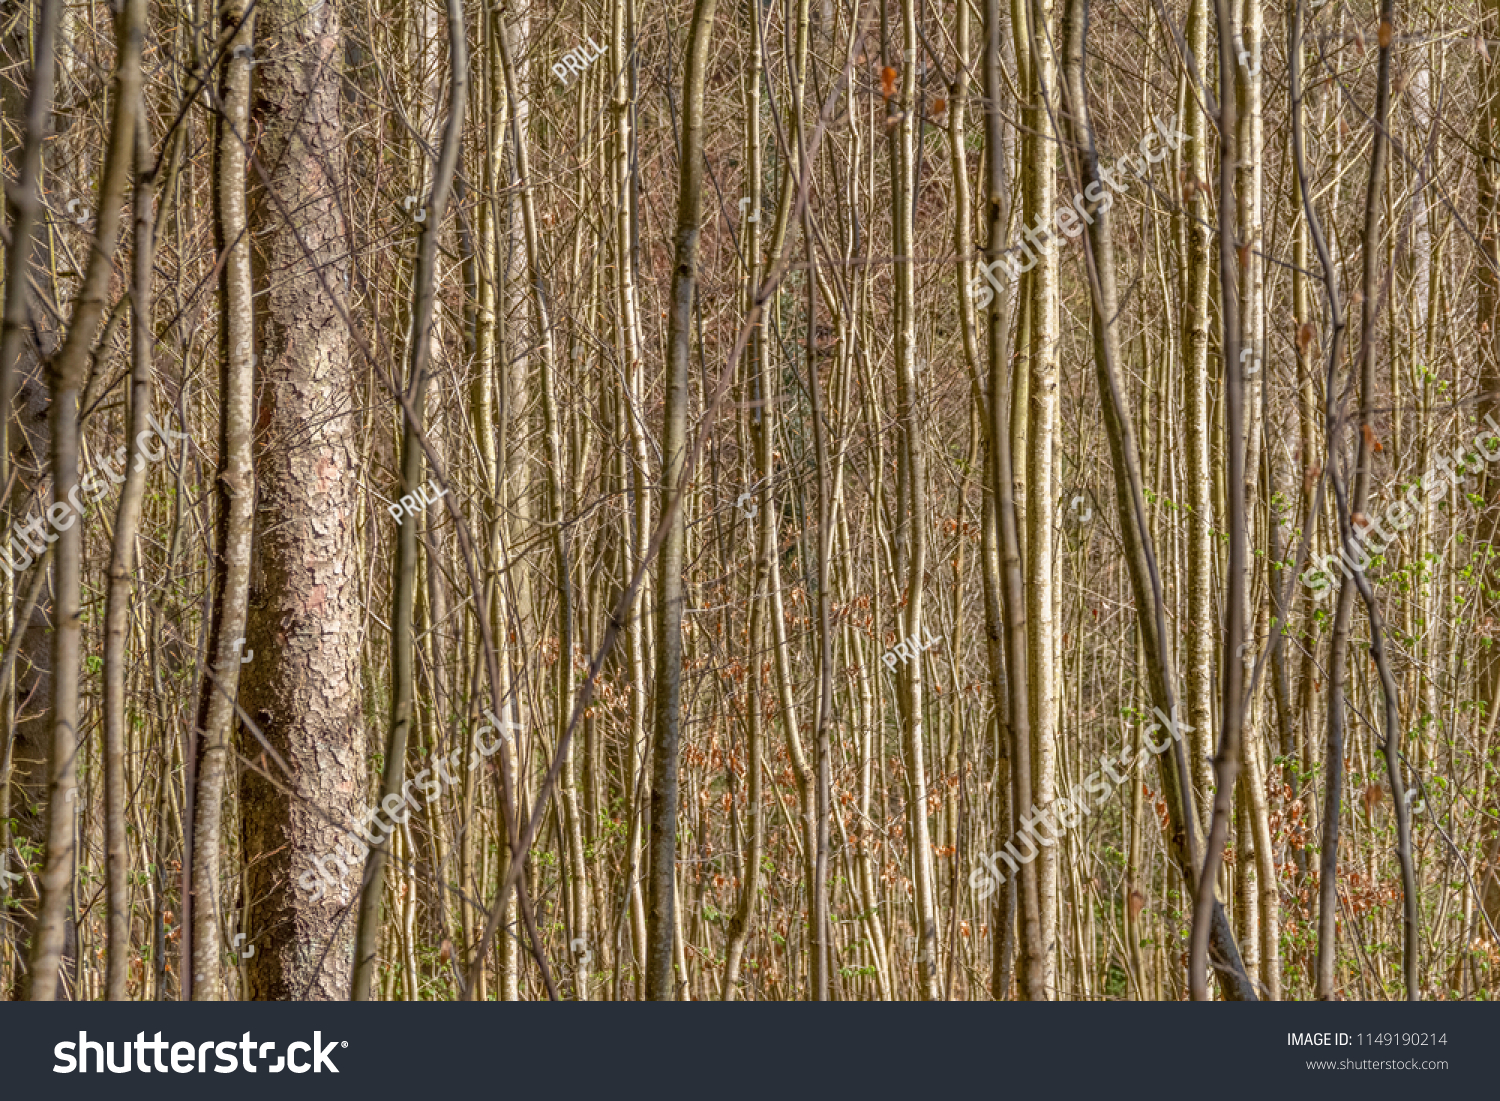 full frame background showing lots of twigs and stems #1149190214